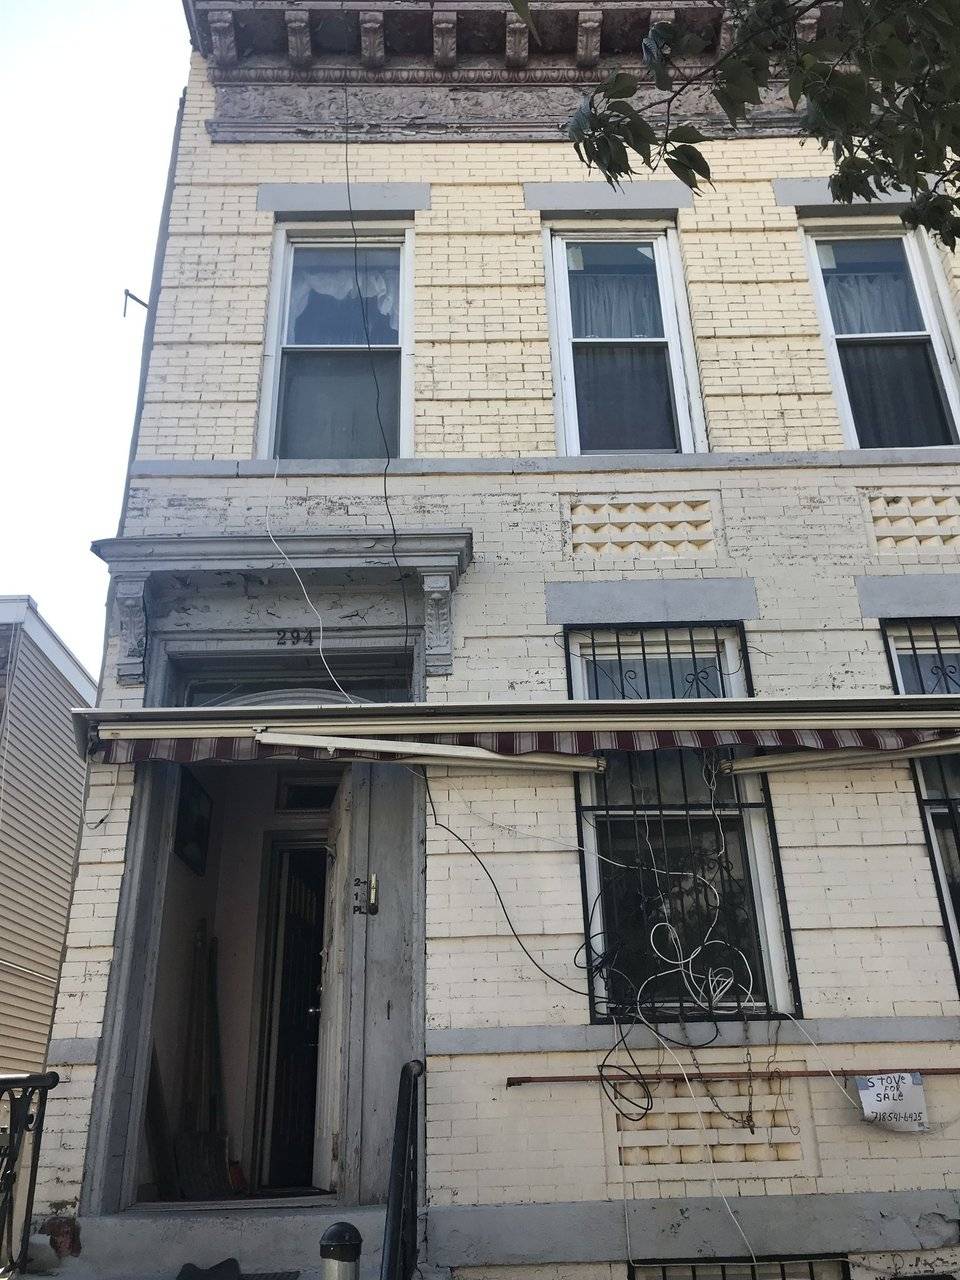 Wonderful East New York 2 Family Brick House for sale located only a few blocks from the L train and a few blocks away from the 3 train.